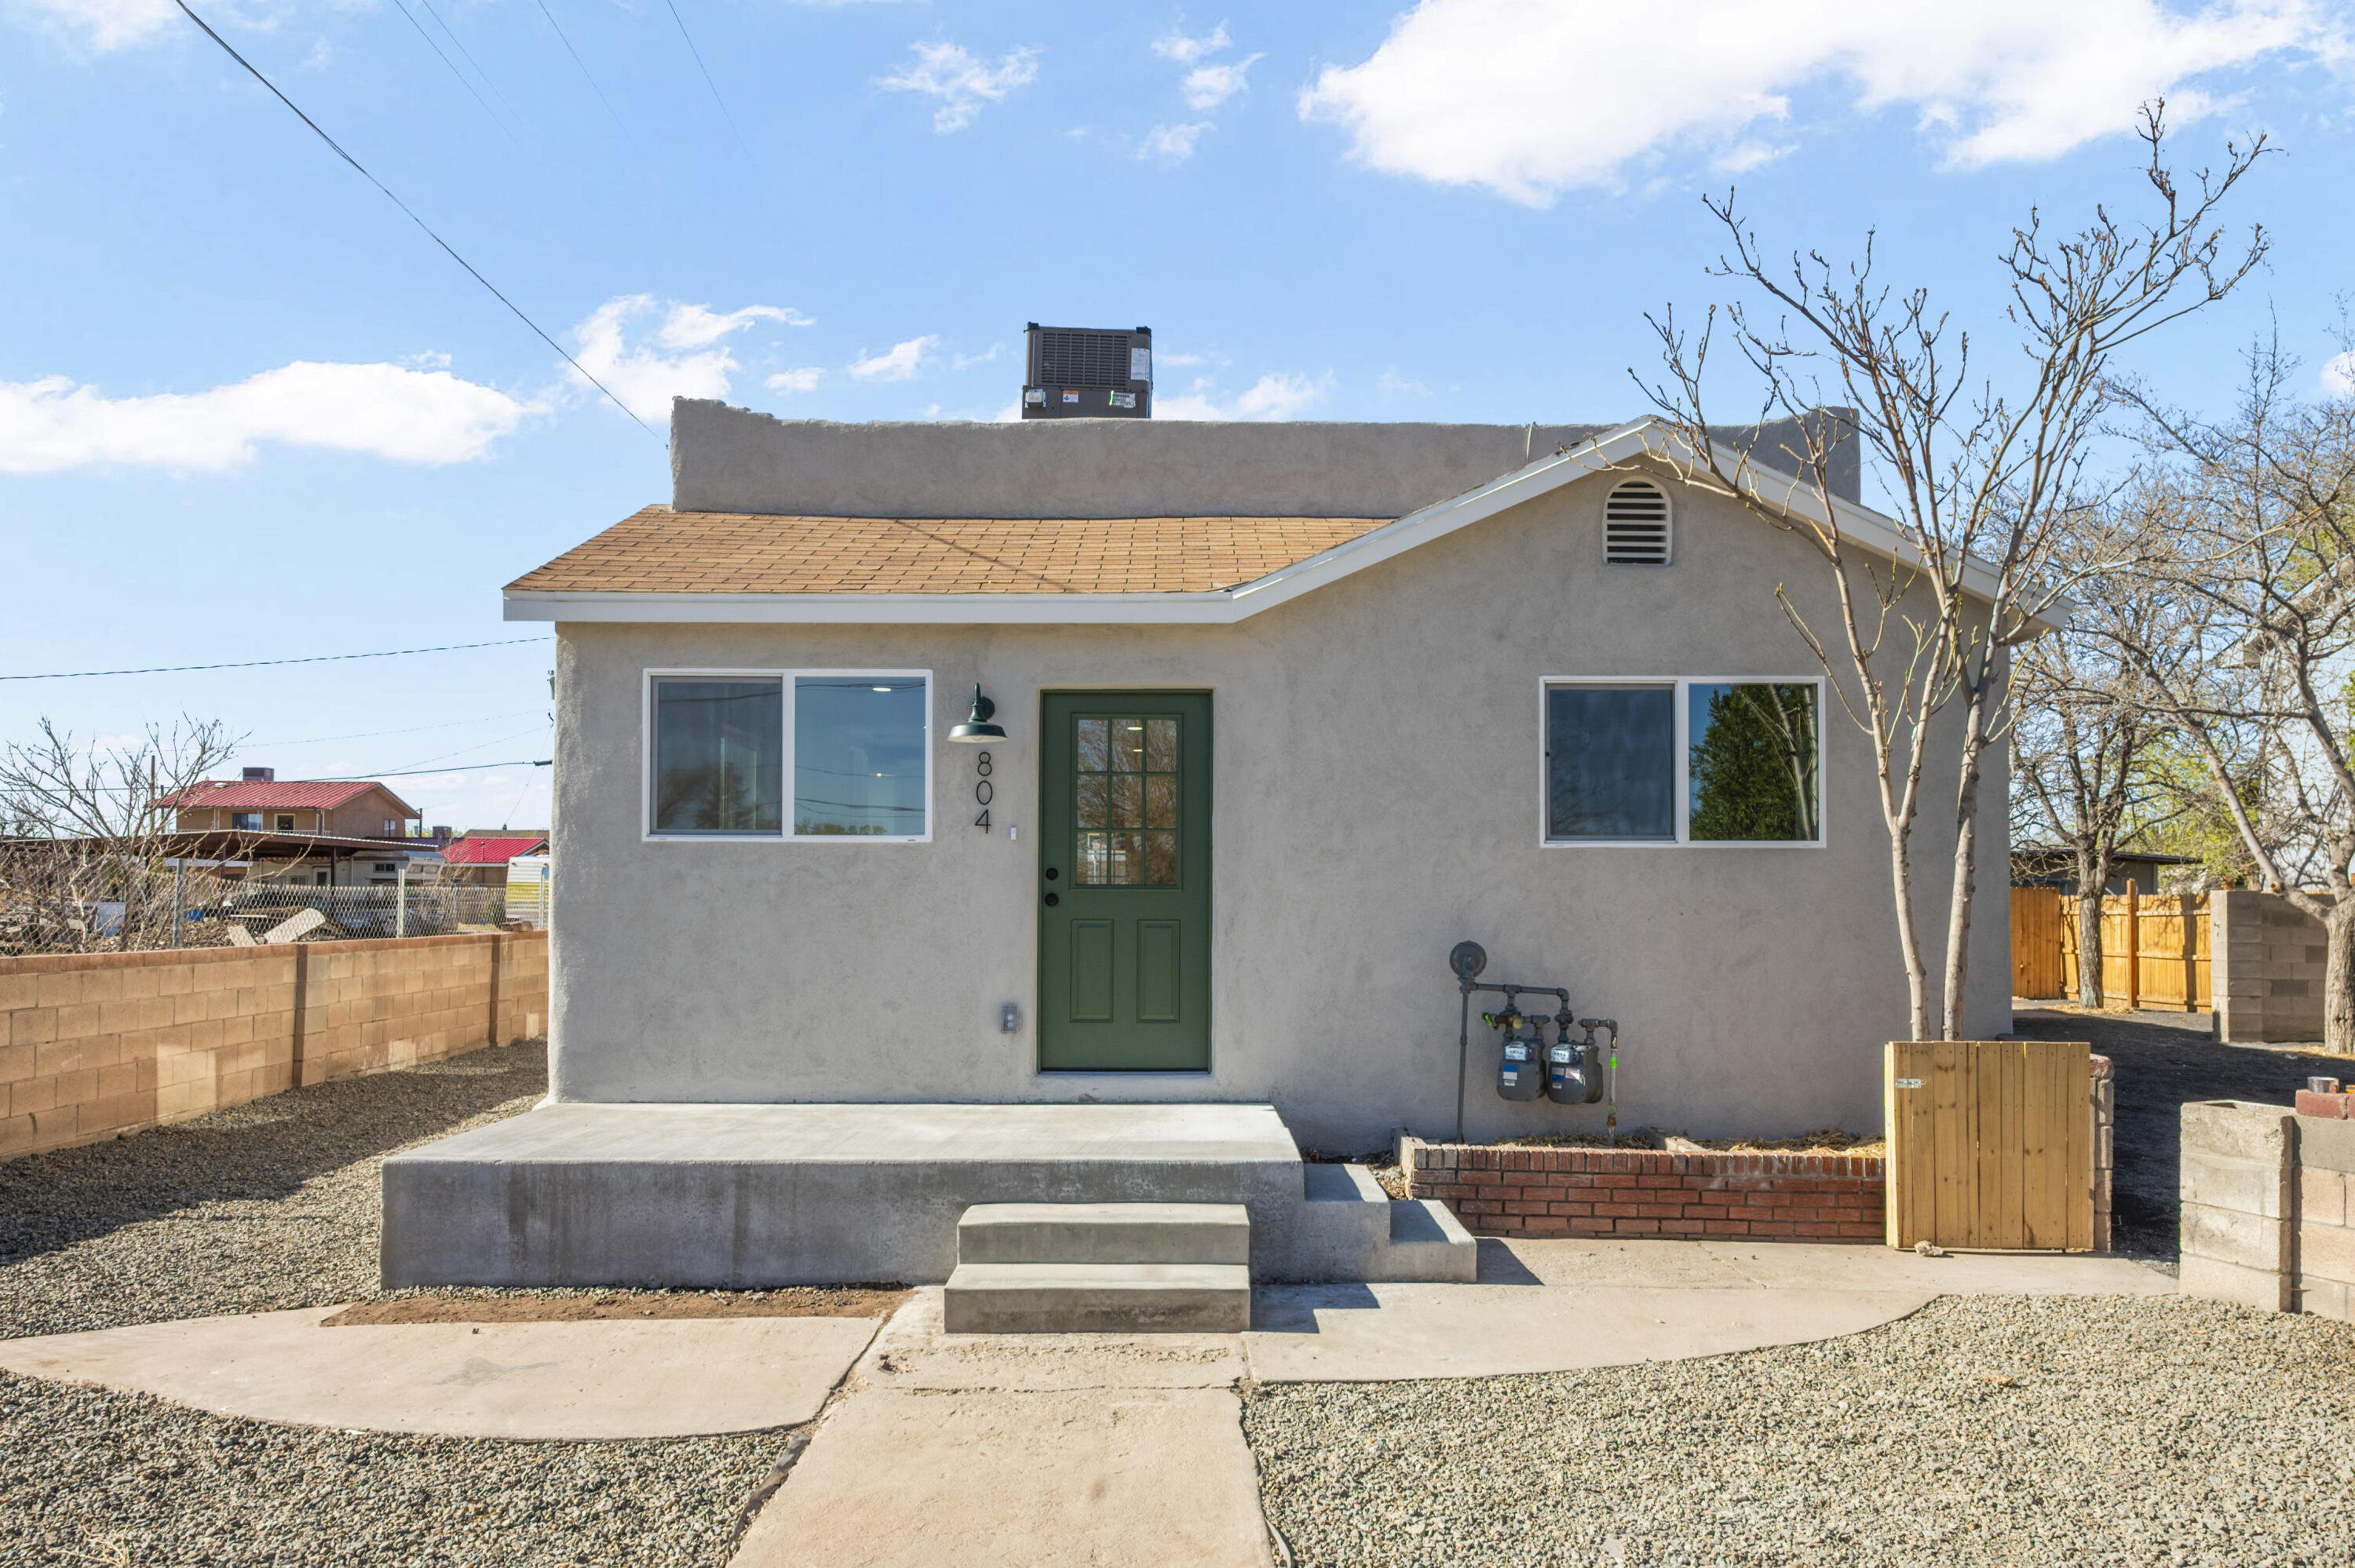 Great Property! Two for One! Live in one, rent the other, fully remodeled ready for the new owner, front House is 3 bdrm 2 bath, 1500 Sq Ft+-  including the Basement, The Casita has been remodeled as well and is a 2 bedroom 1 bath, refrigerated air/heating combo units, double paned windows and much more! come by and take a look!!